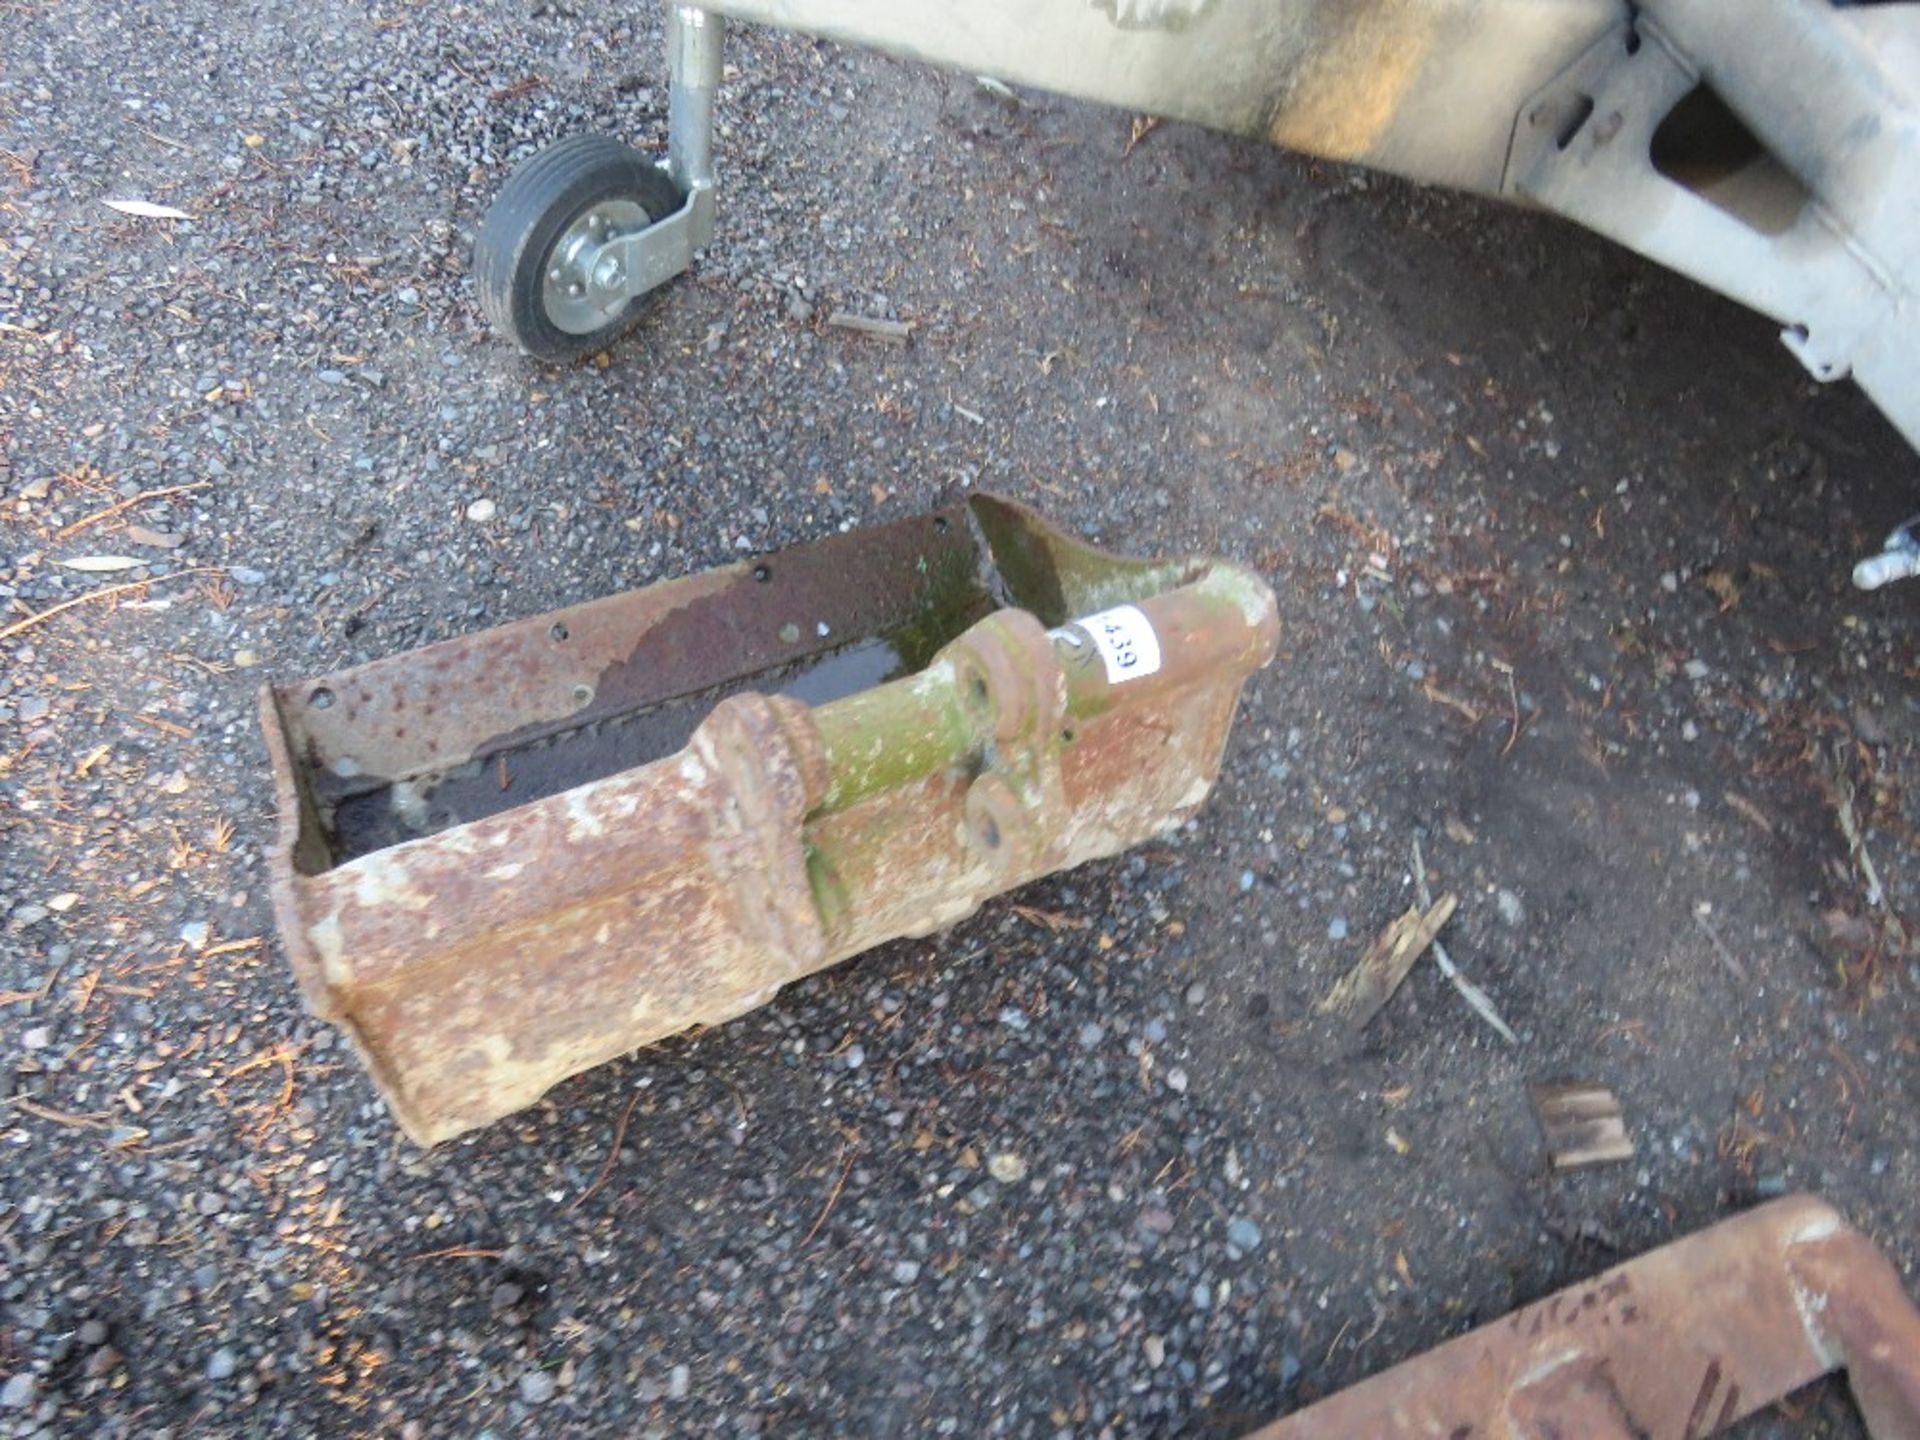 MINI EXCAVATOR BUCKET, 2FT WIDE ON 25MM PINS. SOURCED FROM DEPOT CLOSURE. - Image 2 of 2